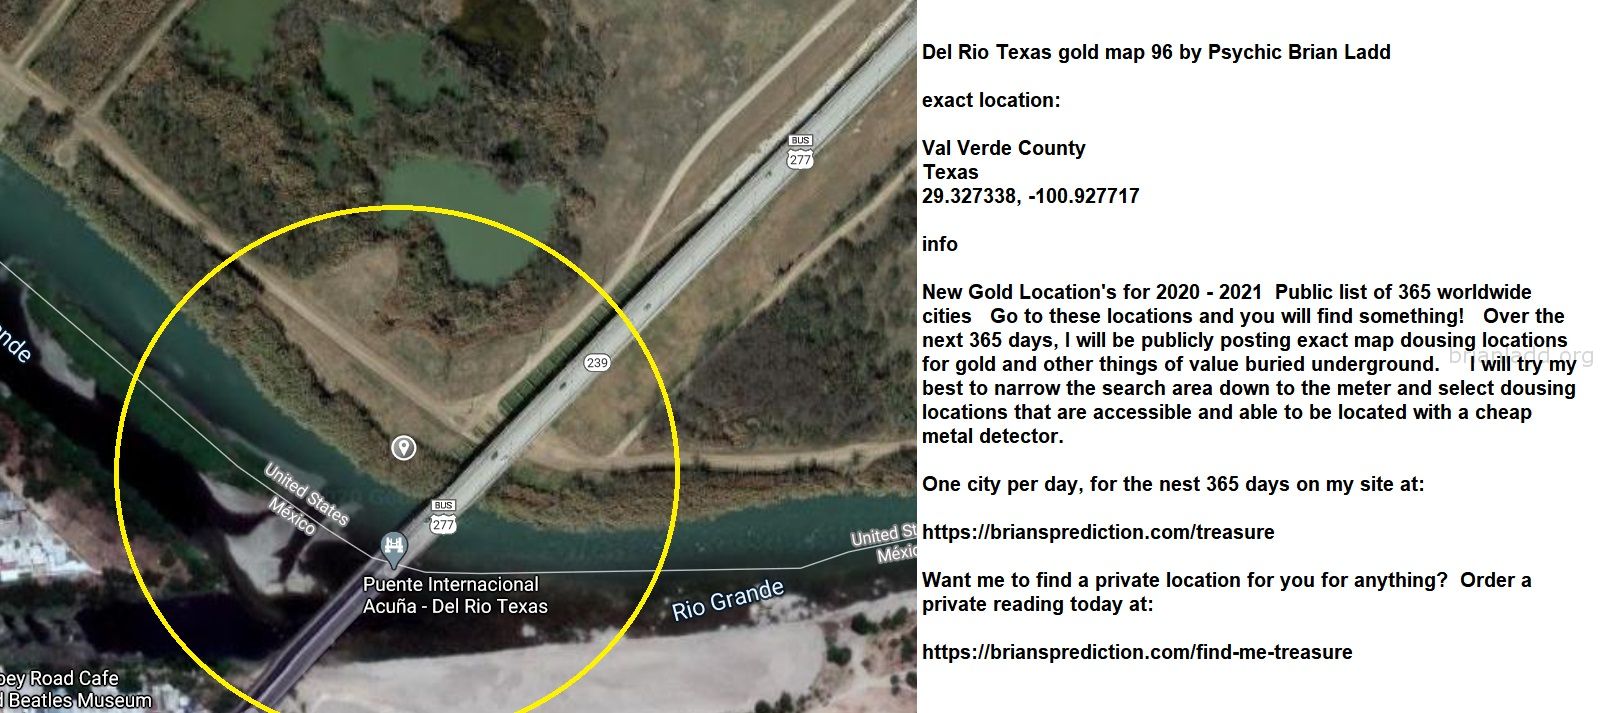 Del Rio Texas gold map 96 by Psychic Brian Ladd
New Gold Location's for 2020 - 2021  Public list of 365 worldwide cities   Go to these locations and you will find something!   Over the next 365 days, I will be publicly posting exact map dousing locations for gold and other things of value buried underground.     I will try my best to narrow the search area down to the meter and select dousing locations that are accessible and able to be located with a cheap metal detector. One city per day, for the nest 365 days on my site at:  https://briansprediction.com/treasure  Want me to find a private location for you for anything?  Order a private reading today at:  https://briansprediction.com/find-me-treasure
